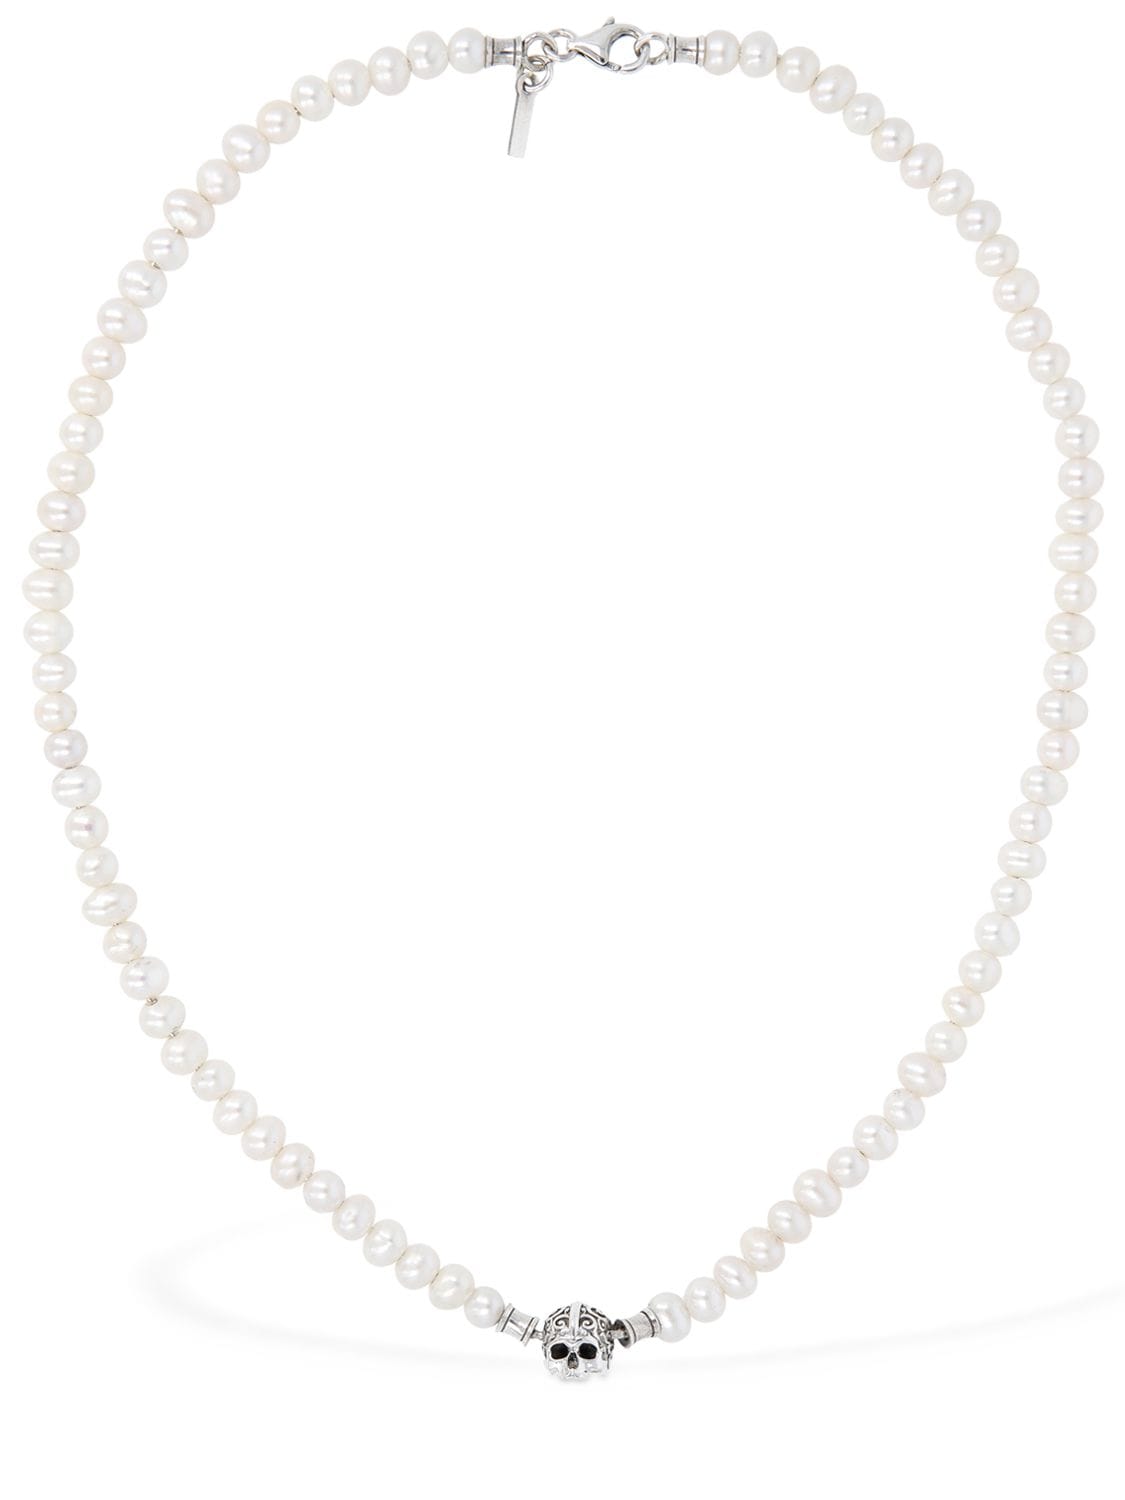 Image of Small Pearl Necklace W/ Arabesque Skull